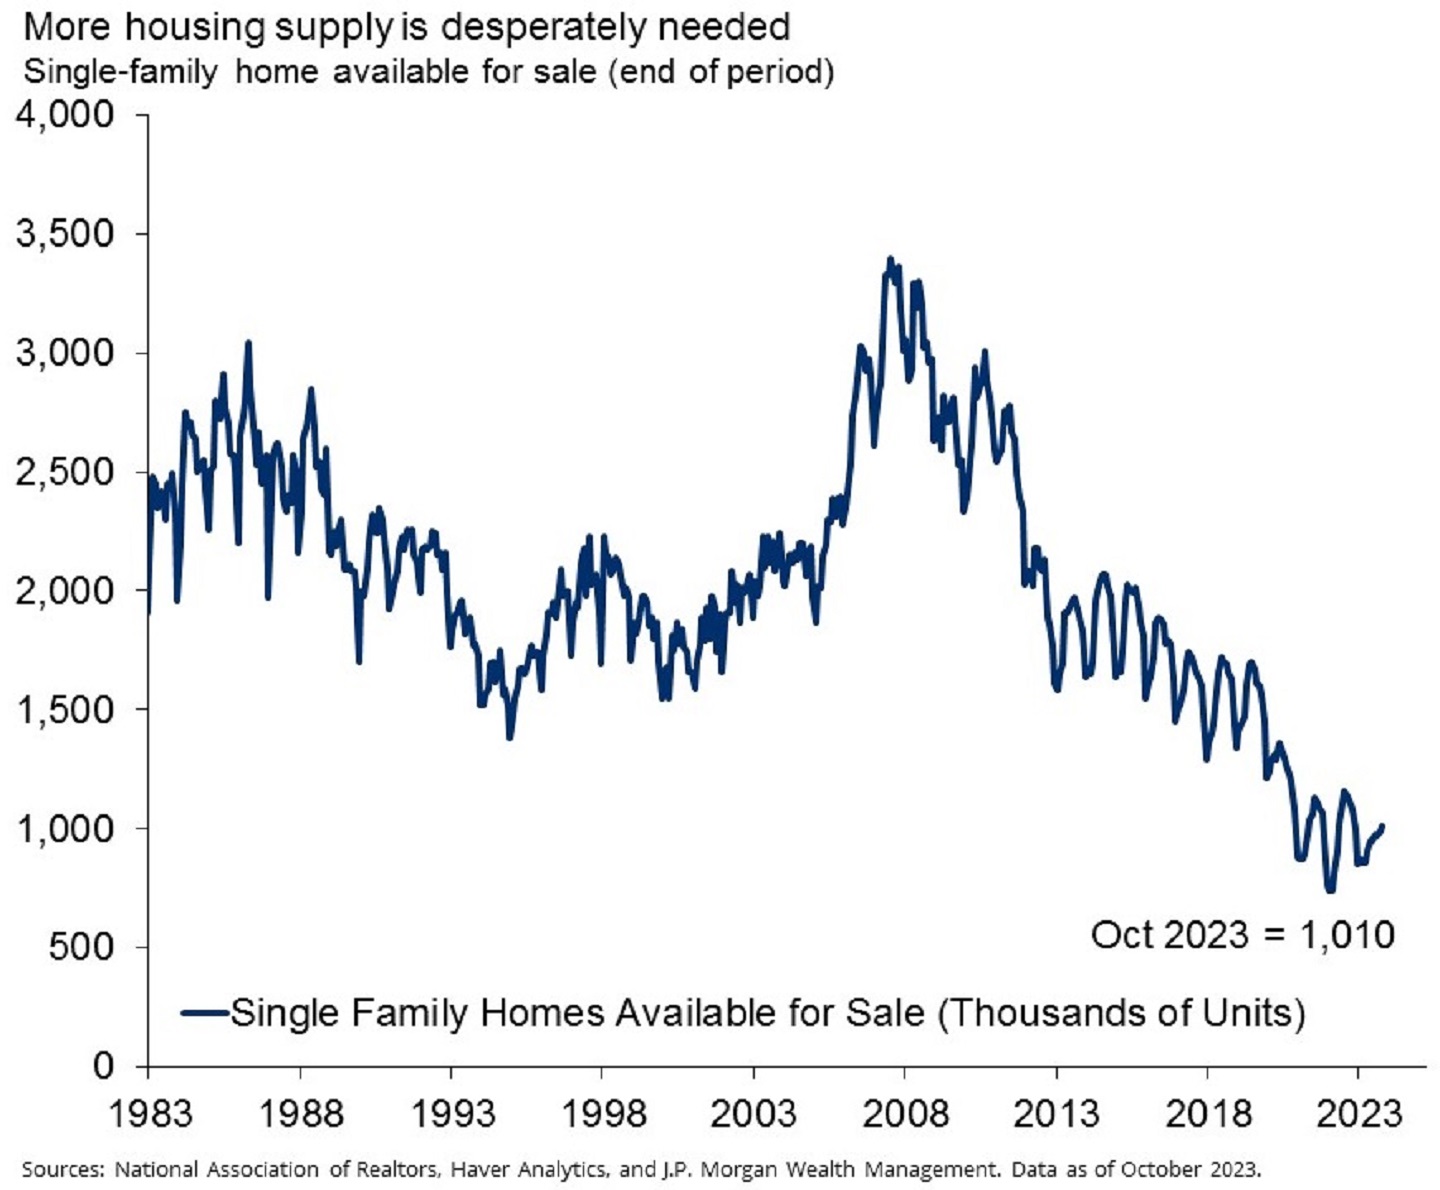 This chart shows the number of single family homes available for sale between 1983 and September 2023.